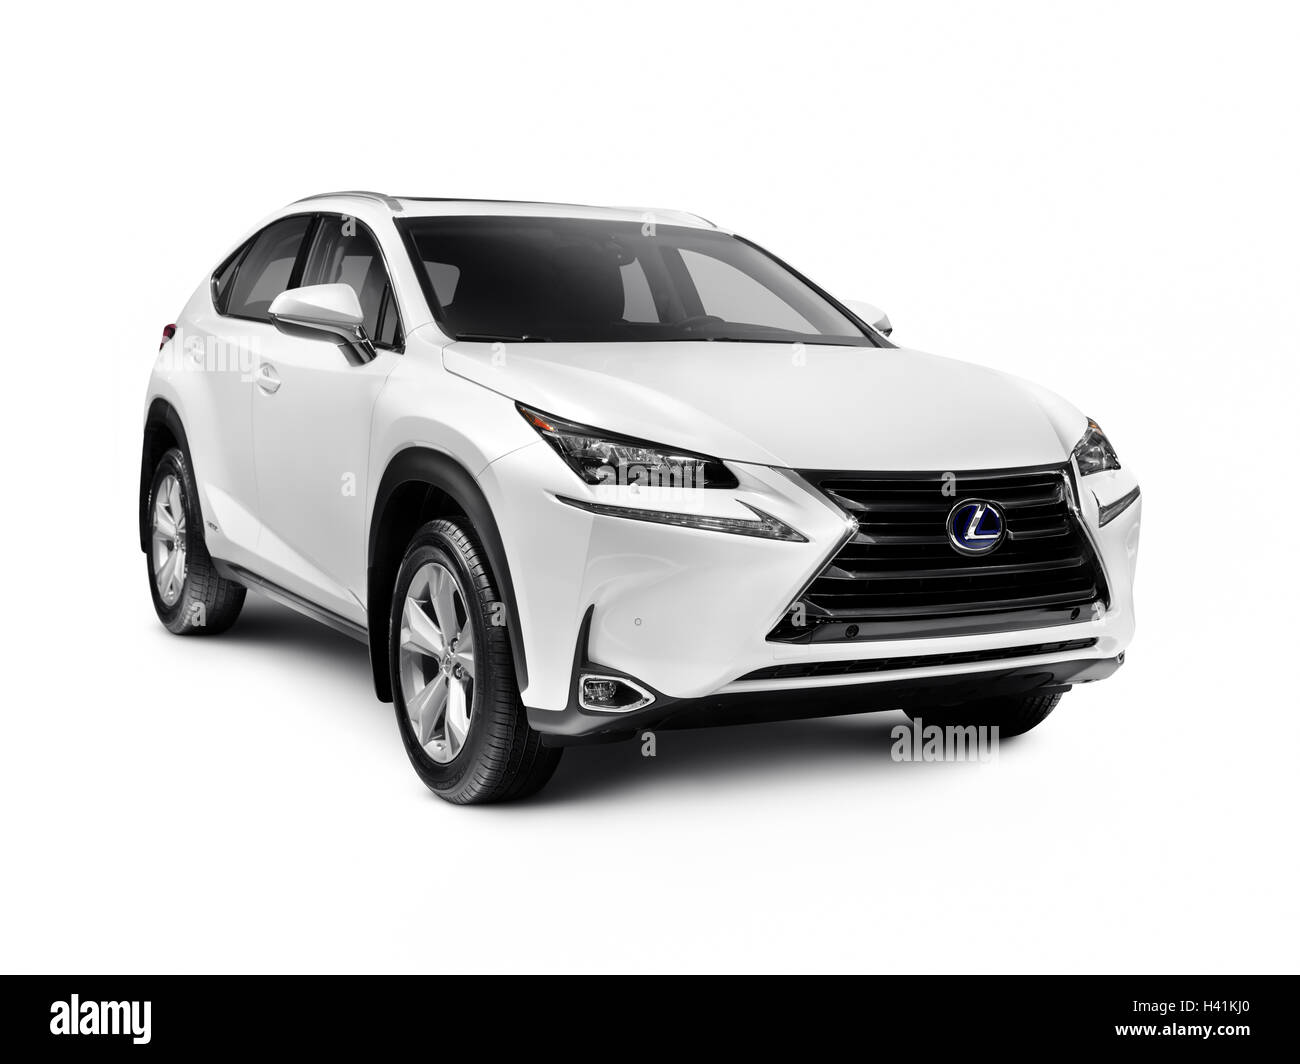 License available at MaximImages.com - White 2016 Lexus NX 300h SUV car mid-sized crossover vehicle isolated on white background Stock Photo